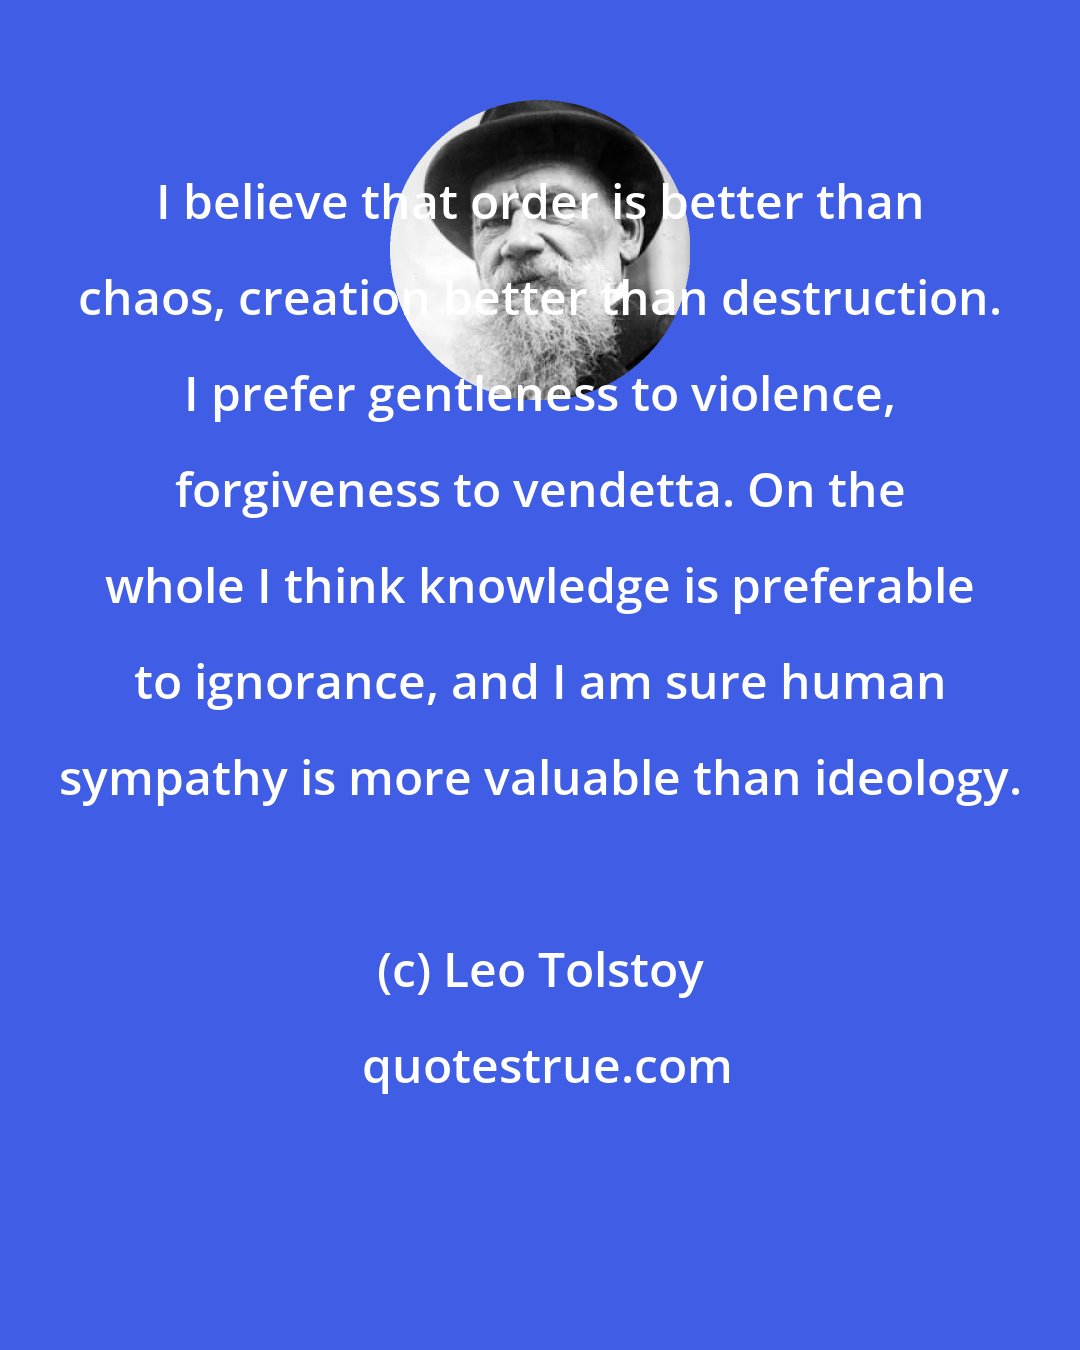 Leo Tolstoy: I believe that order is better than chaos, creation better than destruction. I prefer gentleness to violence, forgiveness to vendetta. On the whole I think knowledge is preferable to ignorance, and I am sure human sympathy is more valuable than ideology.